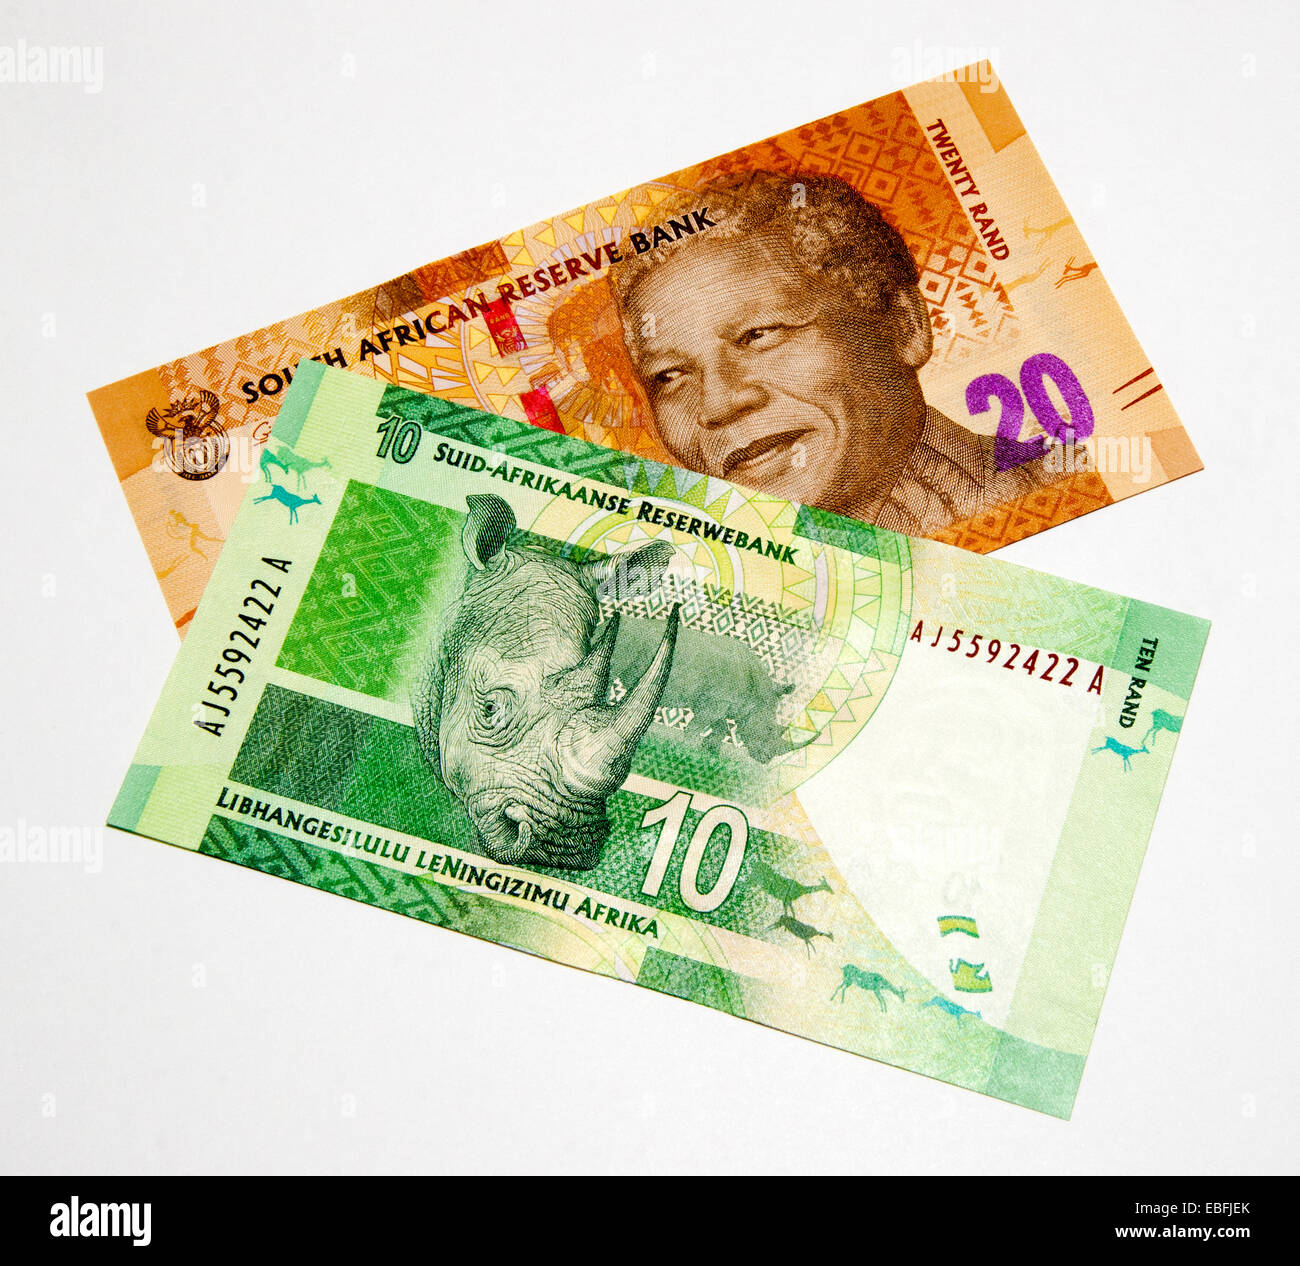 South Africa Bank Notes Stock Photo